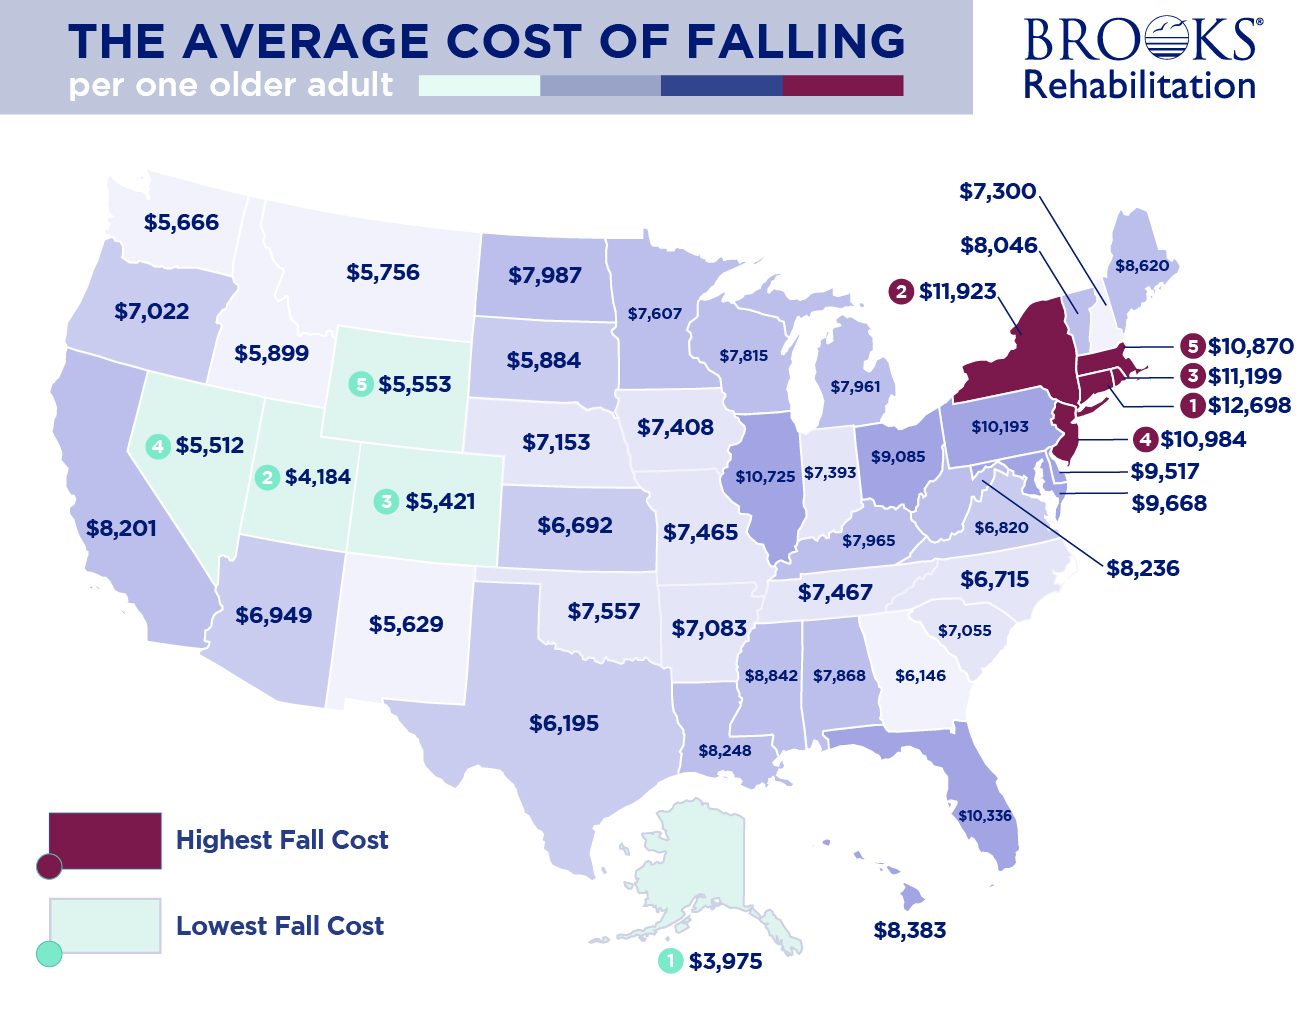 heatmap of the U.S. indicating the states with the highest average medical cost of falls to the lowest. 